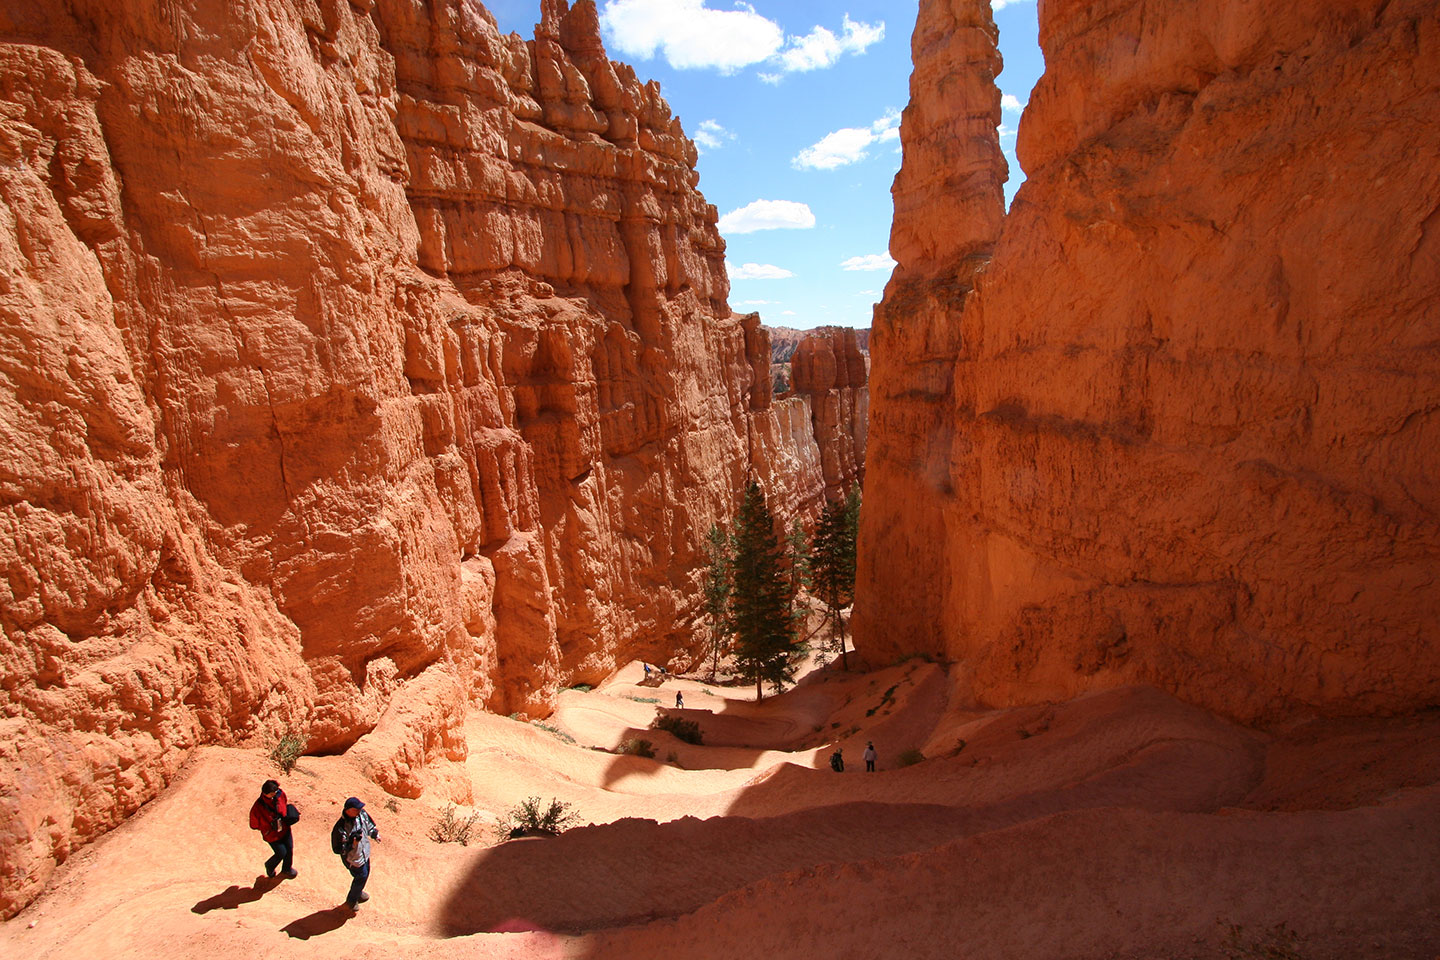 Hikers in Bryce Canyon National Park in Utah